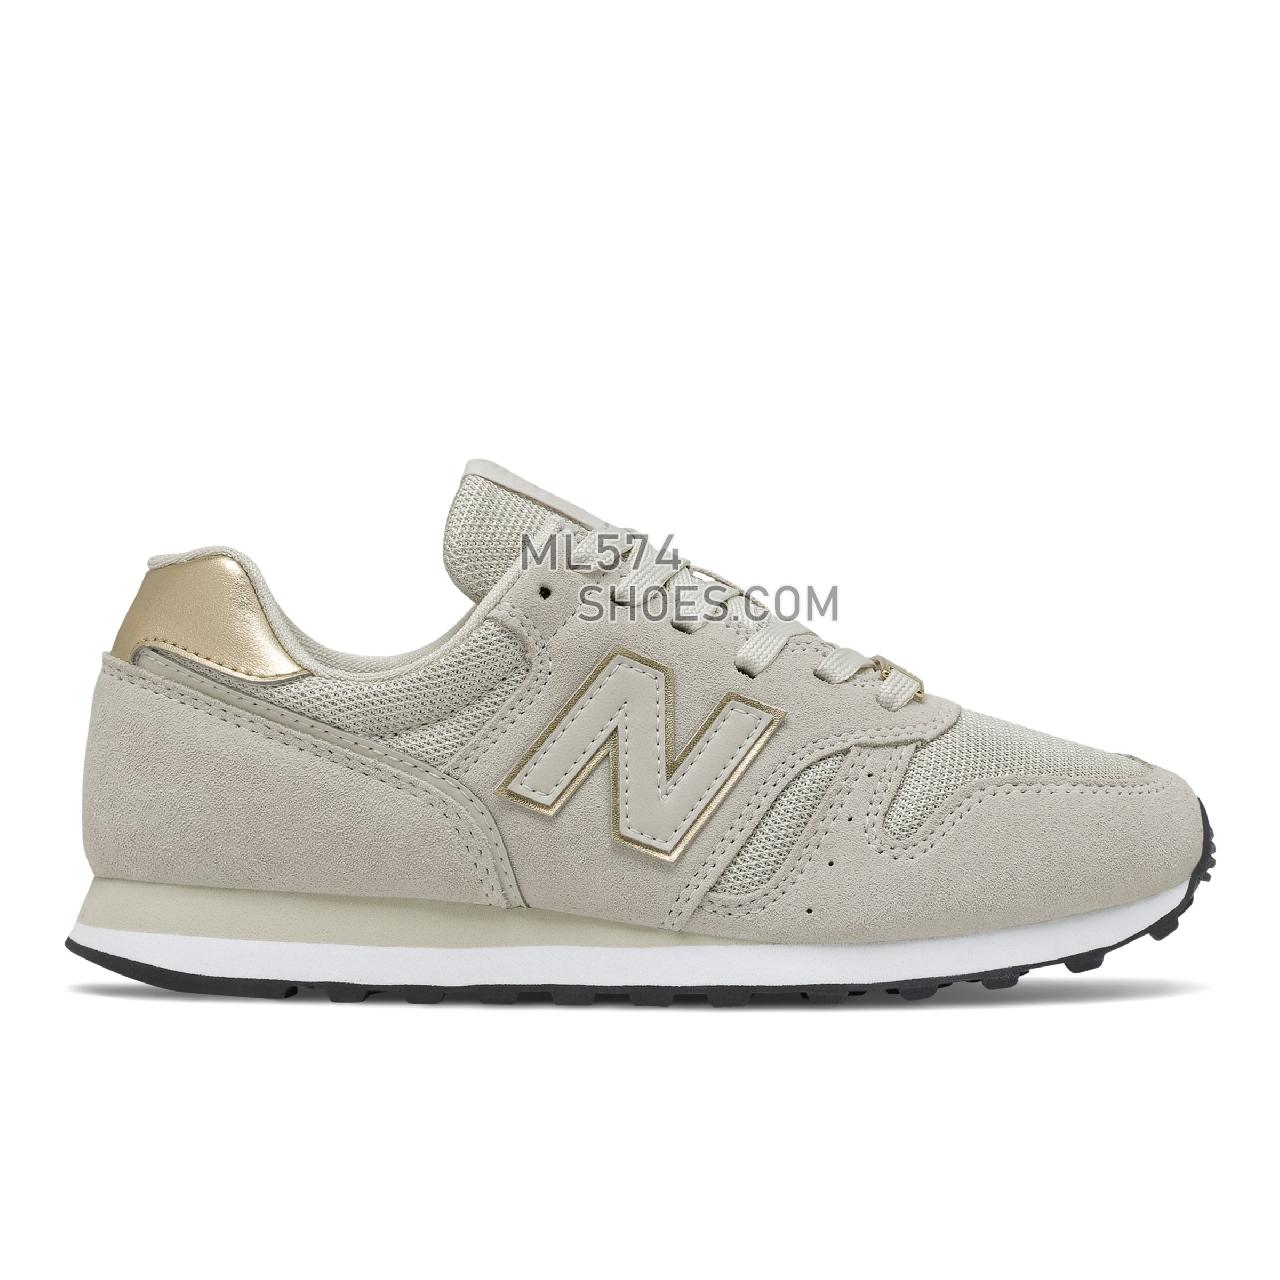 New Balance 373V2 - Women's Classic Sneakers - Silver Birch with Gold Metallic - WL373MT2